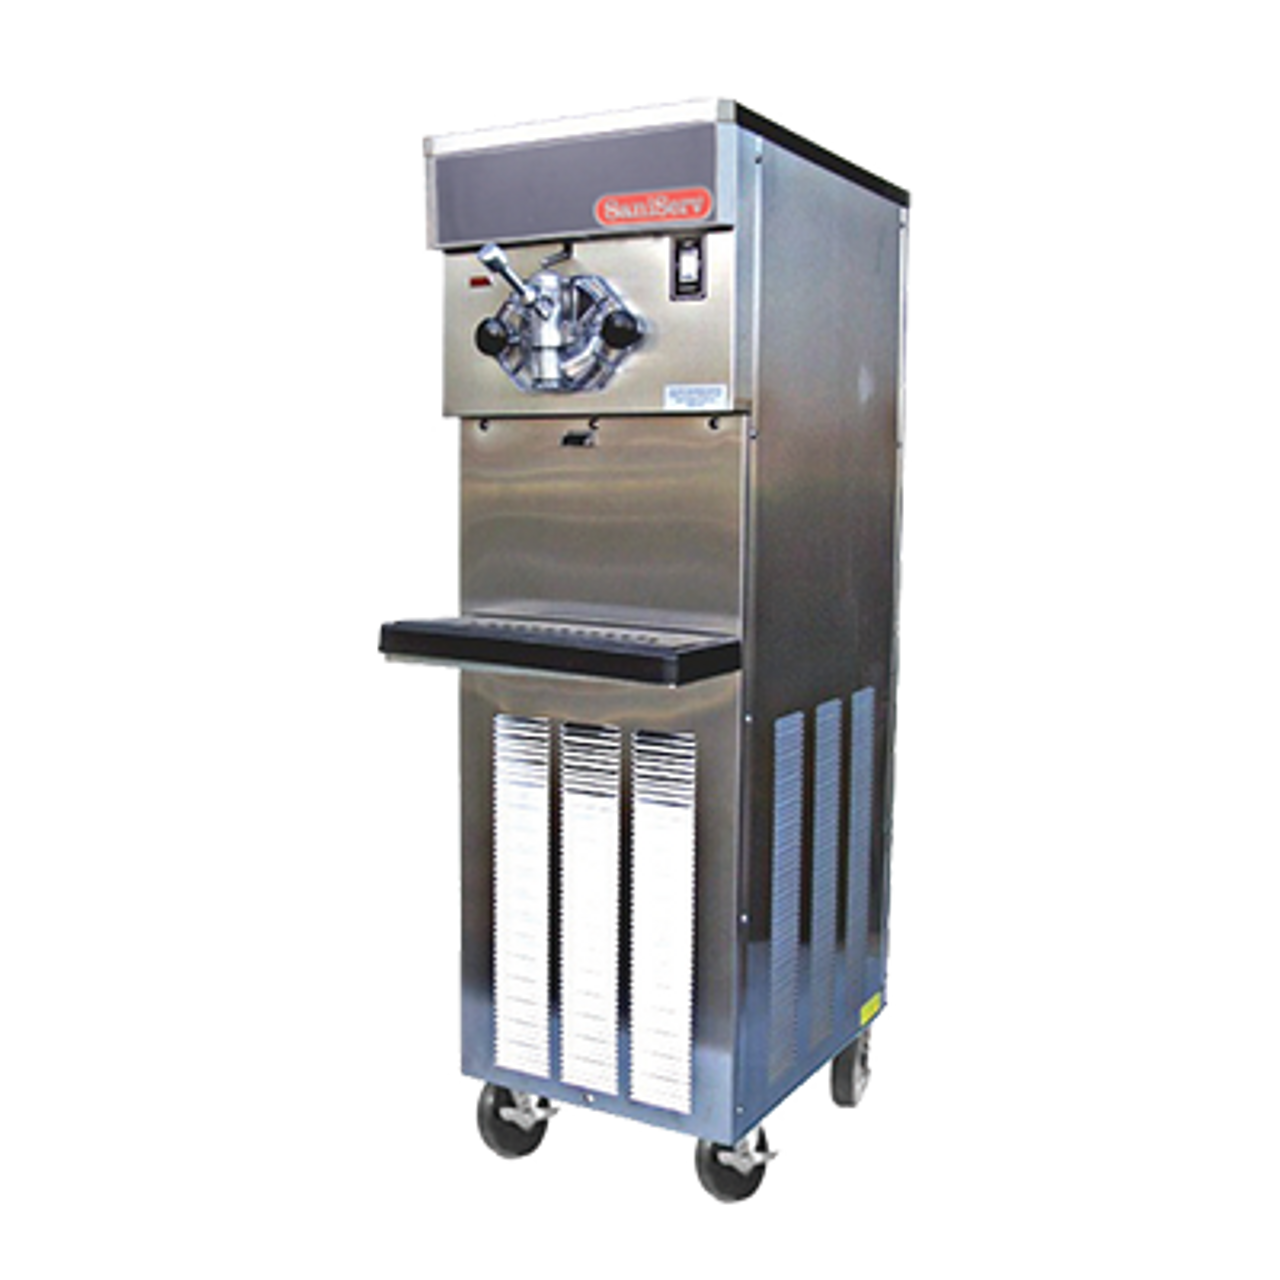 Soft Serve/Yogurt Freezer, floor model, air or water cooled, self-contained refrigeration, 1 head, 20 qt. mix capacity, welded steel frame, stainless steel exterior, electronic consistency control, automatic audible/visual mix out system, 1 HP dasher, 2 HP compressor, casters included, UL, cUL, NSF